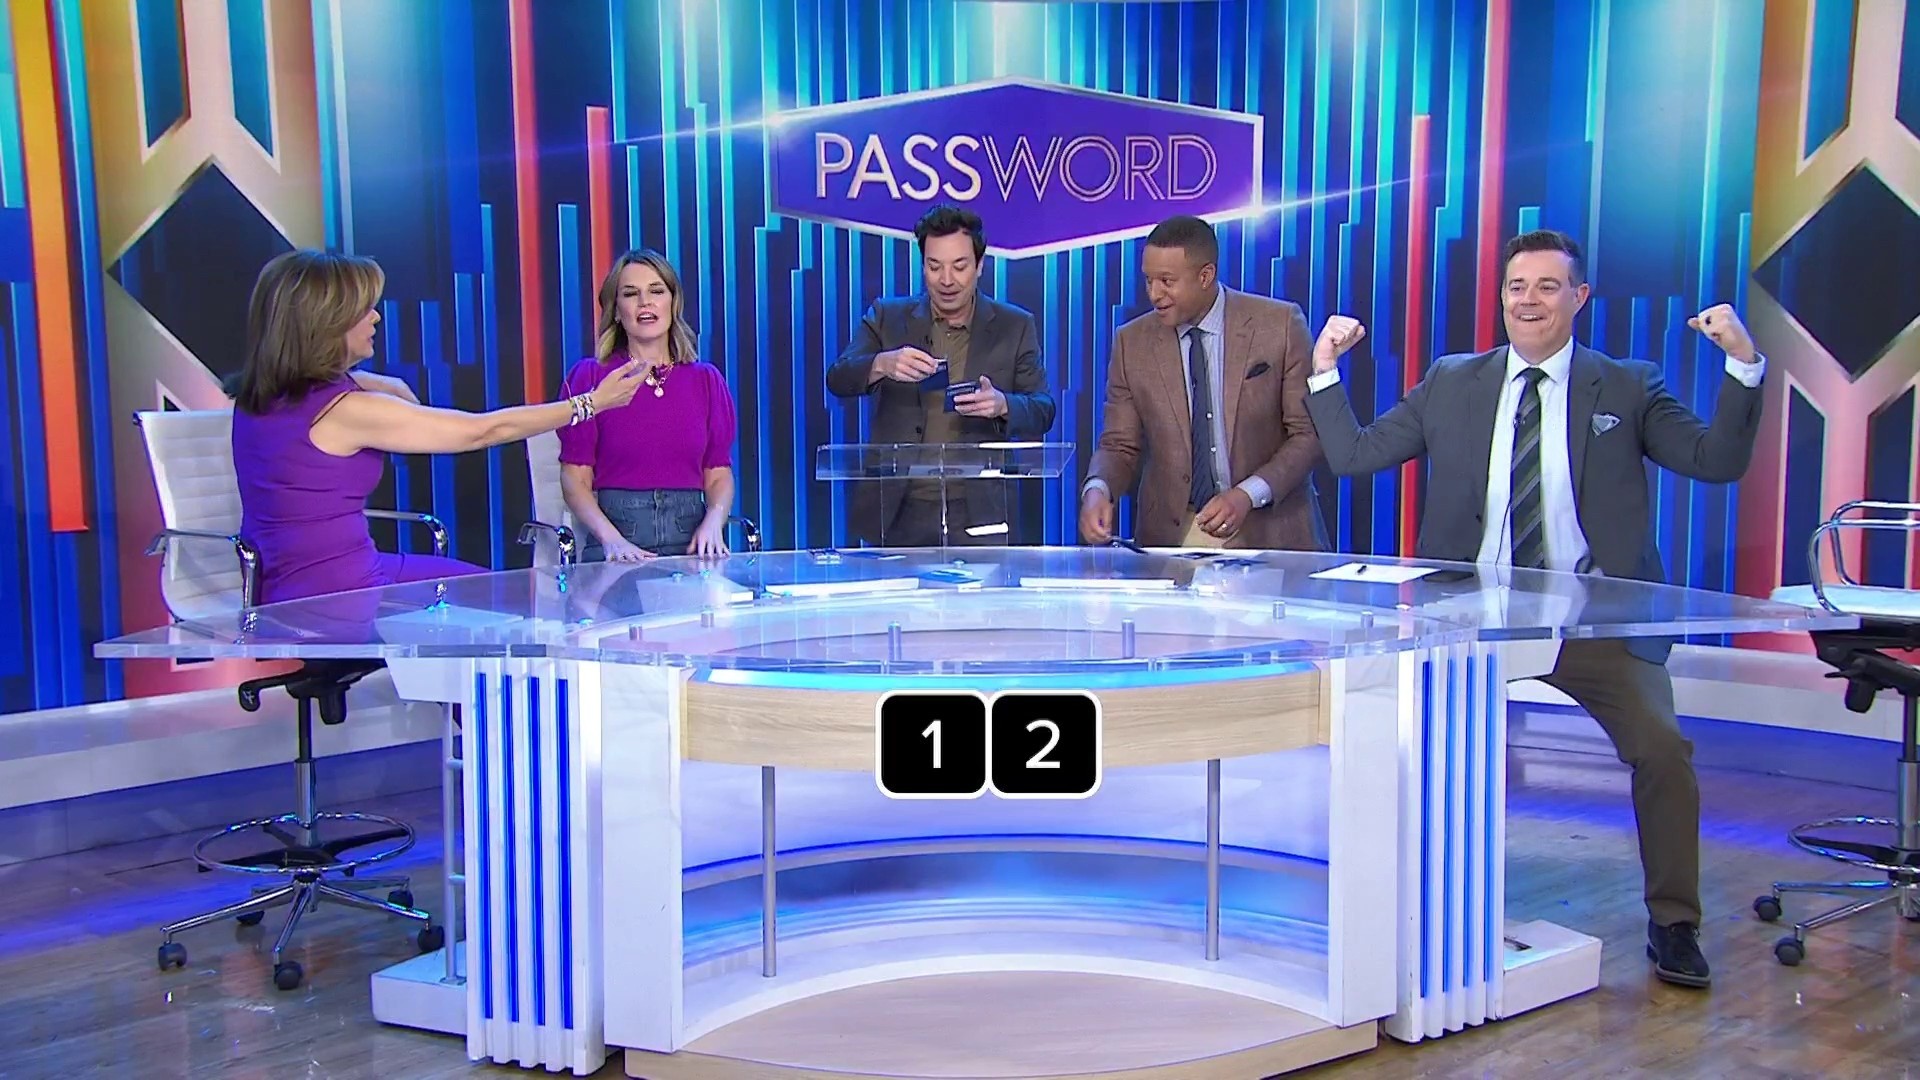 Watch Jimmy Fallon play 'Password' with TODAY anchors